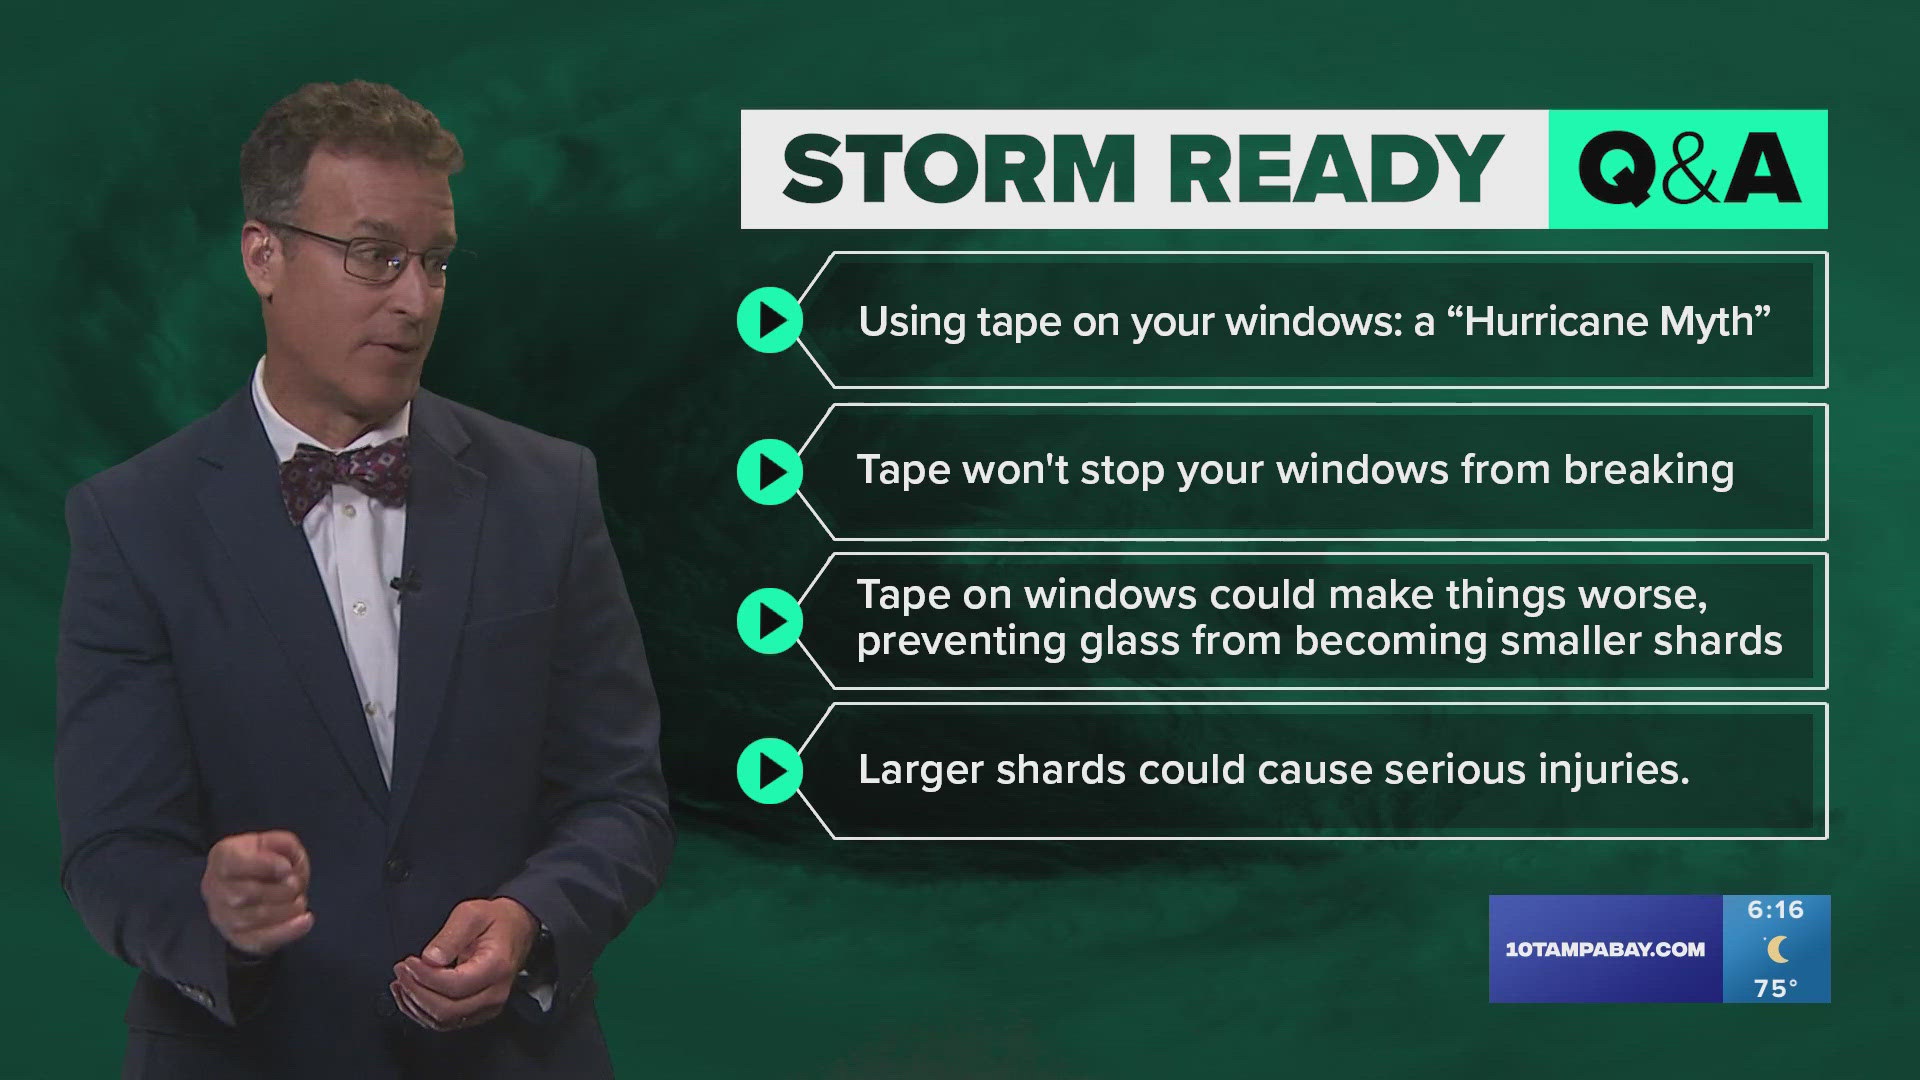 A big myth is that tape will protect your windows during a hurricane. Tape won't stop your window from breaking, in fact, it could make things worse.